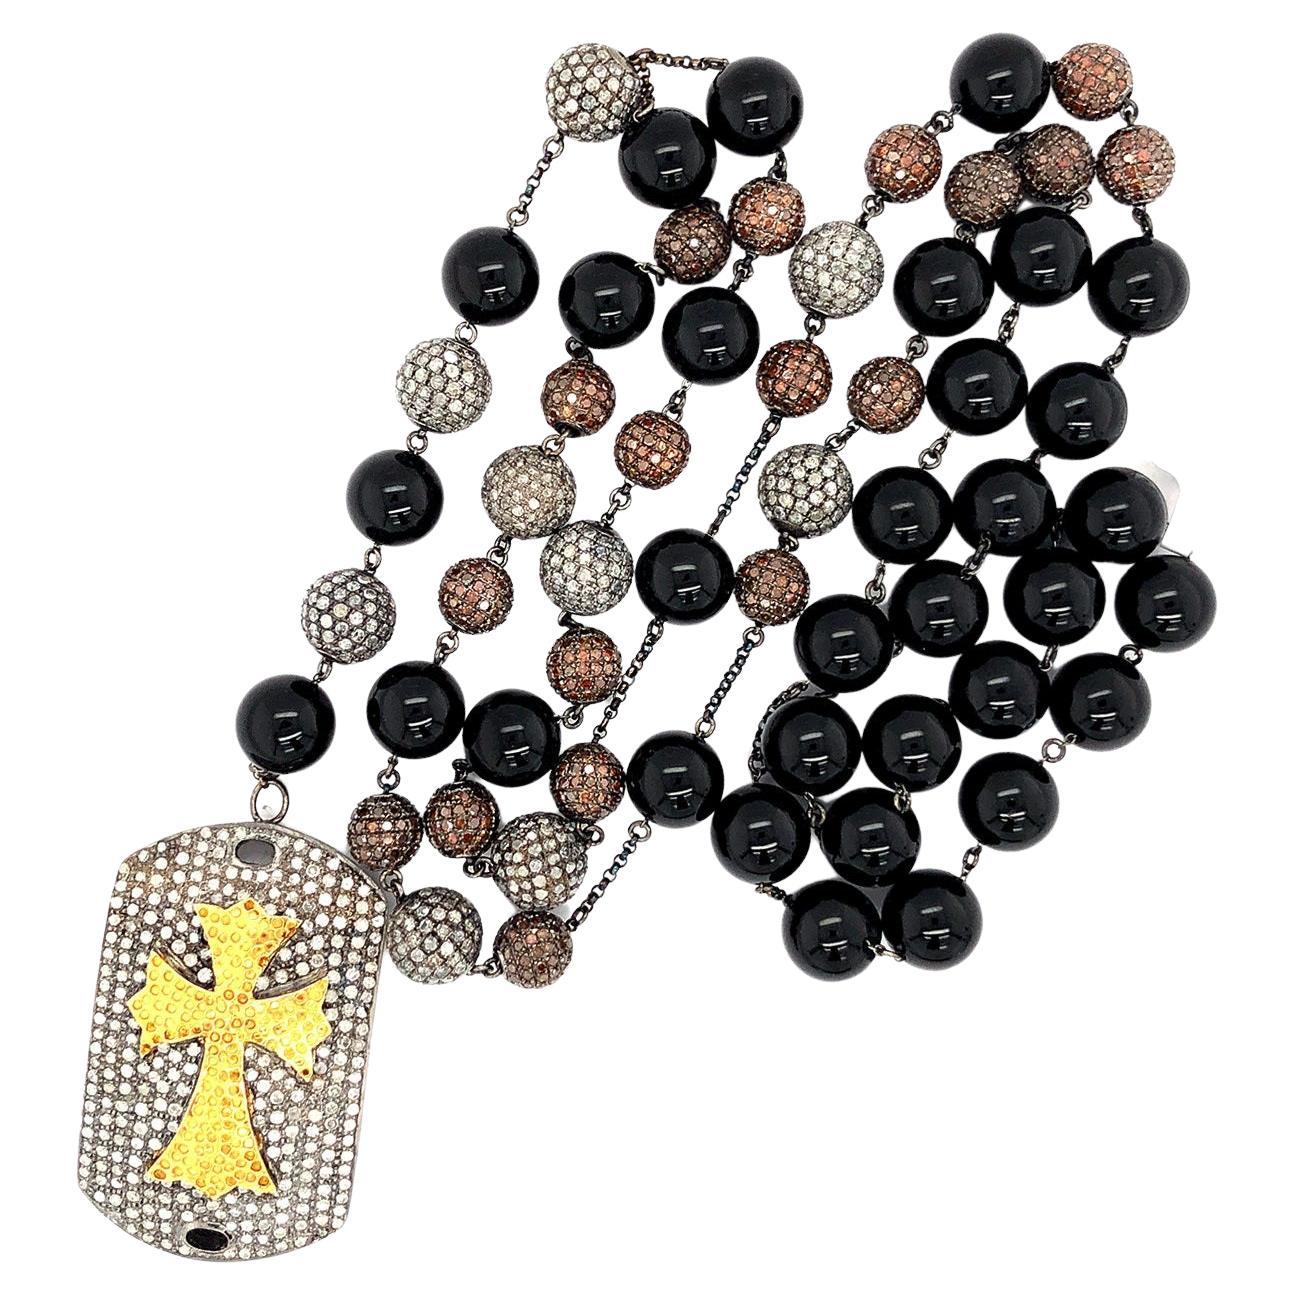 Diamond Beads Onyx Necklace with Cross Design Pendant Made in Gold & Silver For Sale